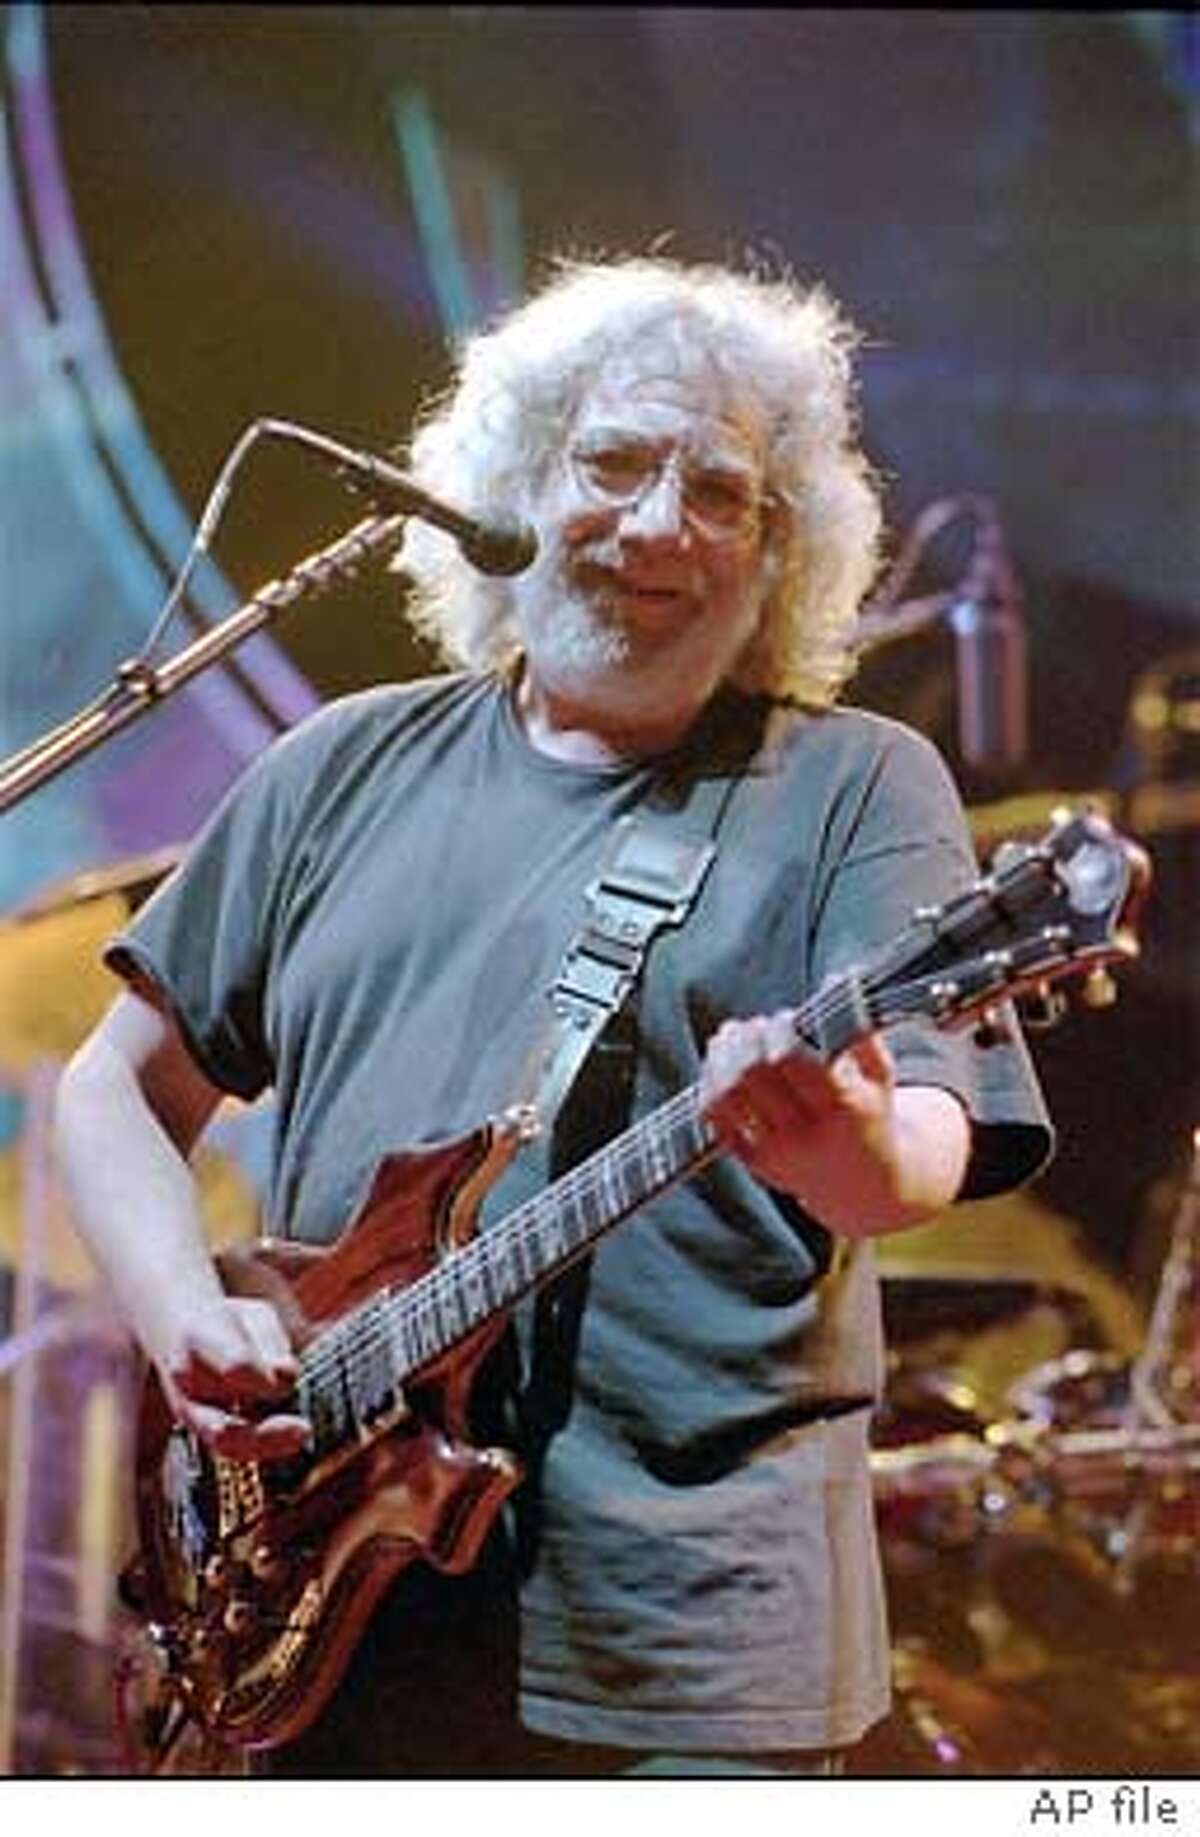 Jerry Garcia performs with the Grateful Dead at the Palace of Auburn Hills, Mich., on Sunday, July 31, 1994. Garcia's 52nd birthday is Monday, Aug. 1. (AP Photo/Jeff Kowalsky)